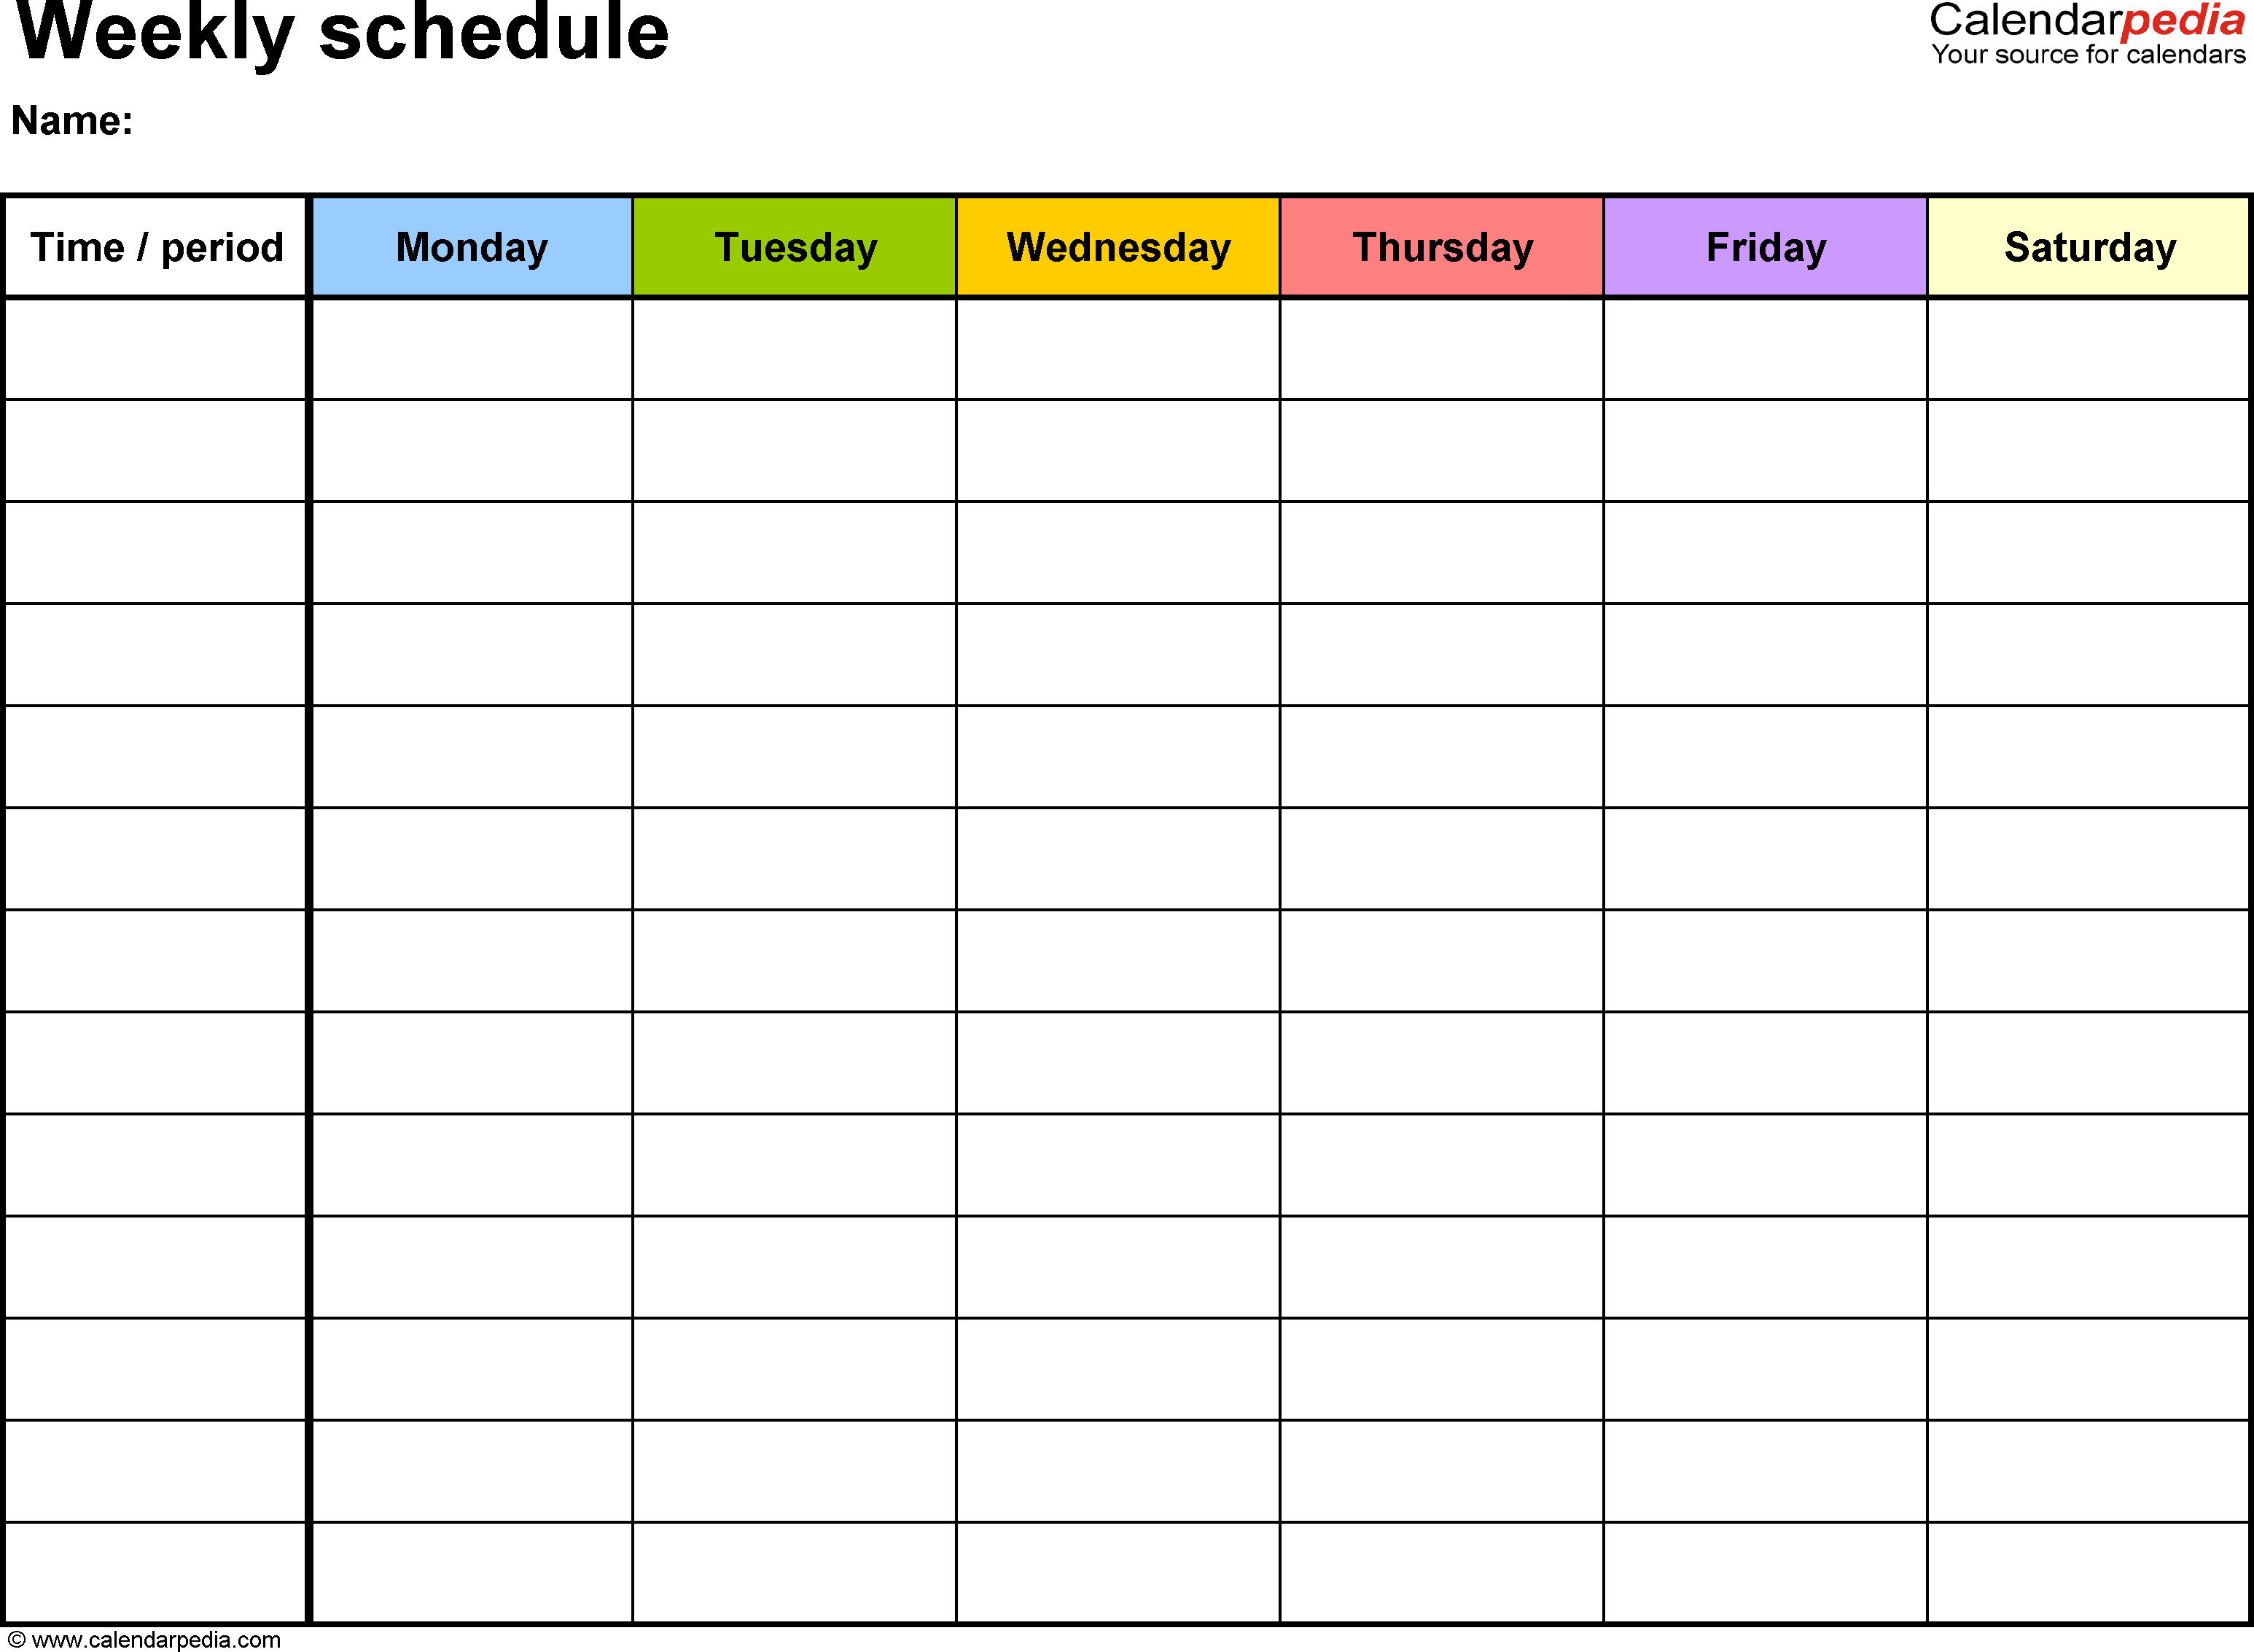 Weekly Schedule Template For Word Version 7: Landscape, 1